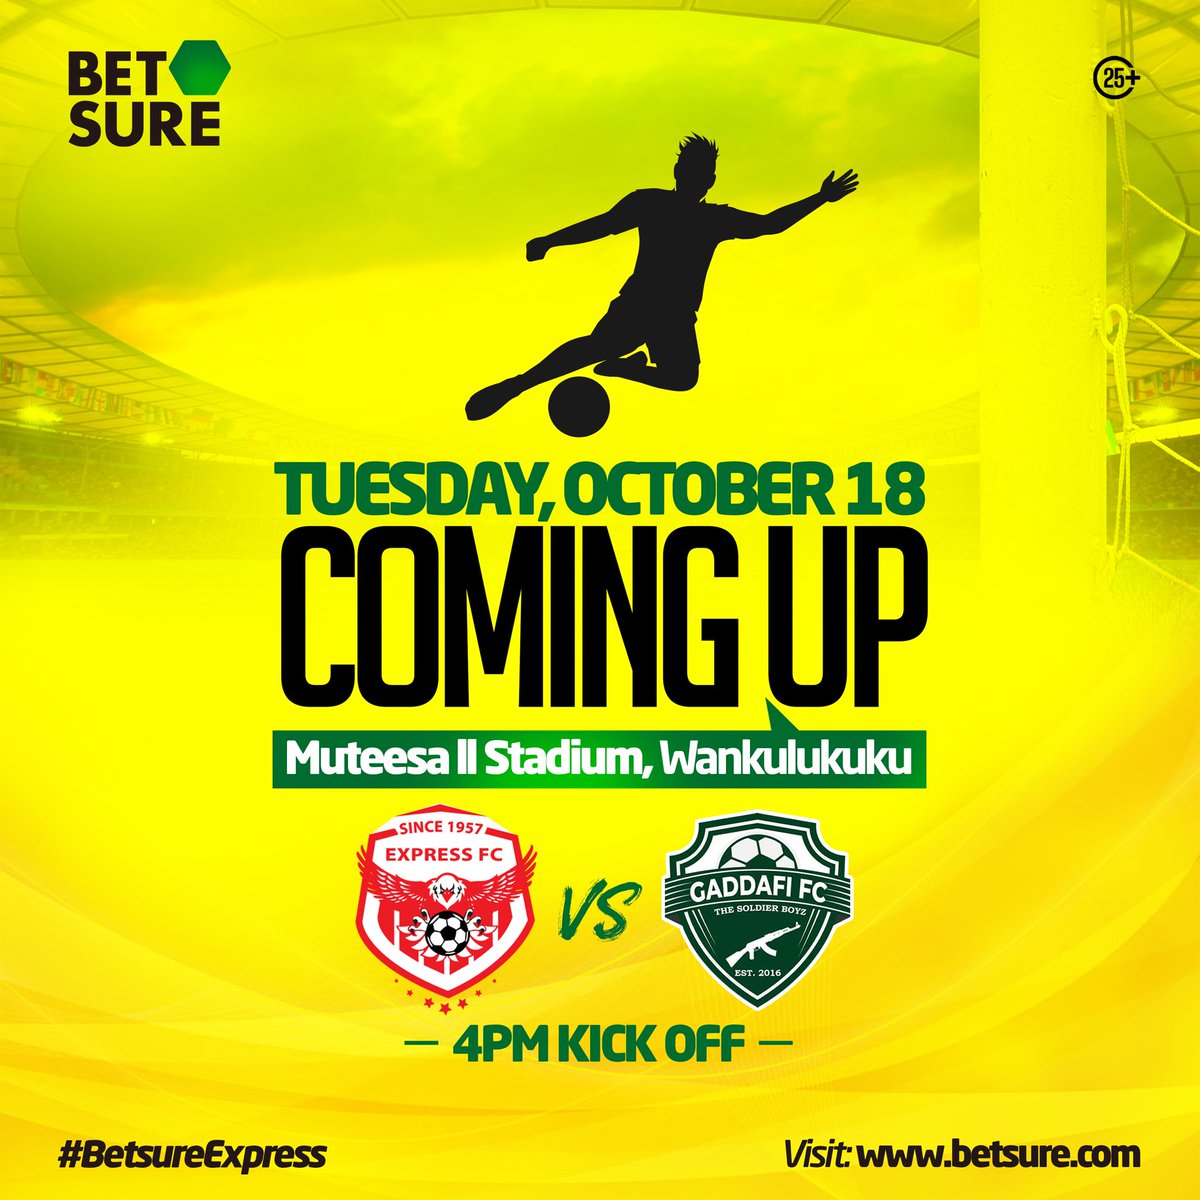 We are back for yet another home game with @ExpressFCUganda 🦅 How many goals do you think the Red eagles will score in tomorrow’s game against Gaddafi FC? Don’t forget to bet on the game at Betsure.com for the BEST ODDS on all markets. #BetsureExpress | #Betsure